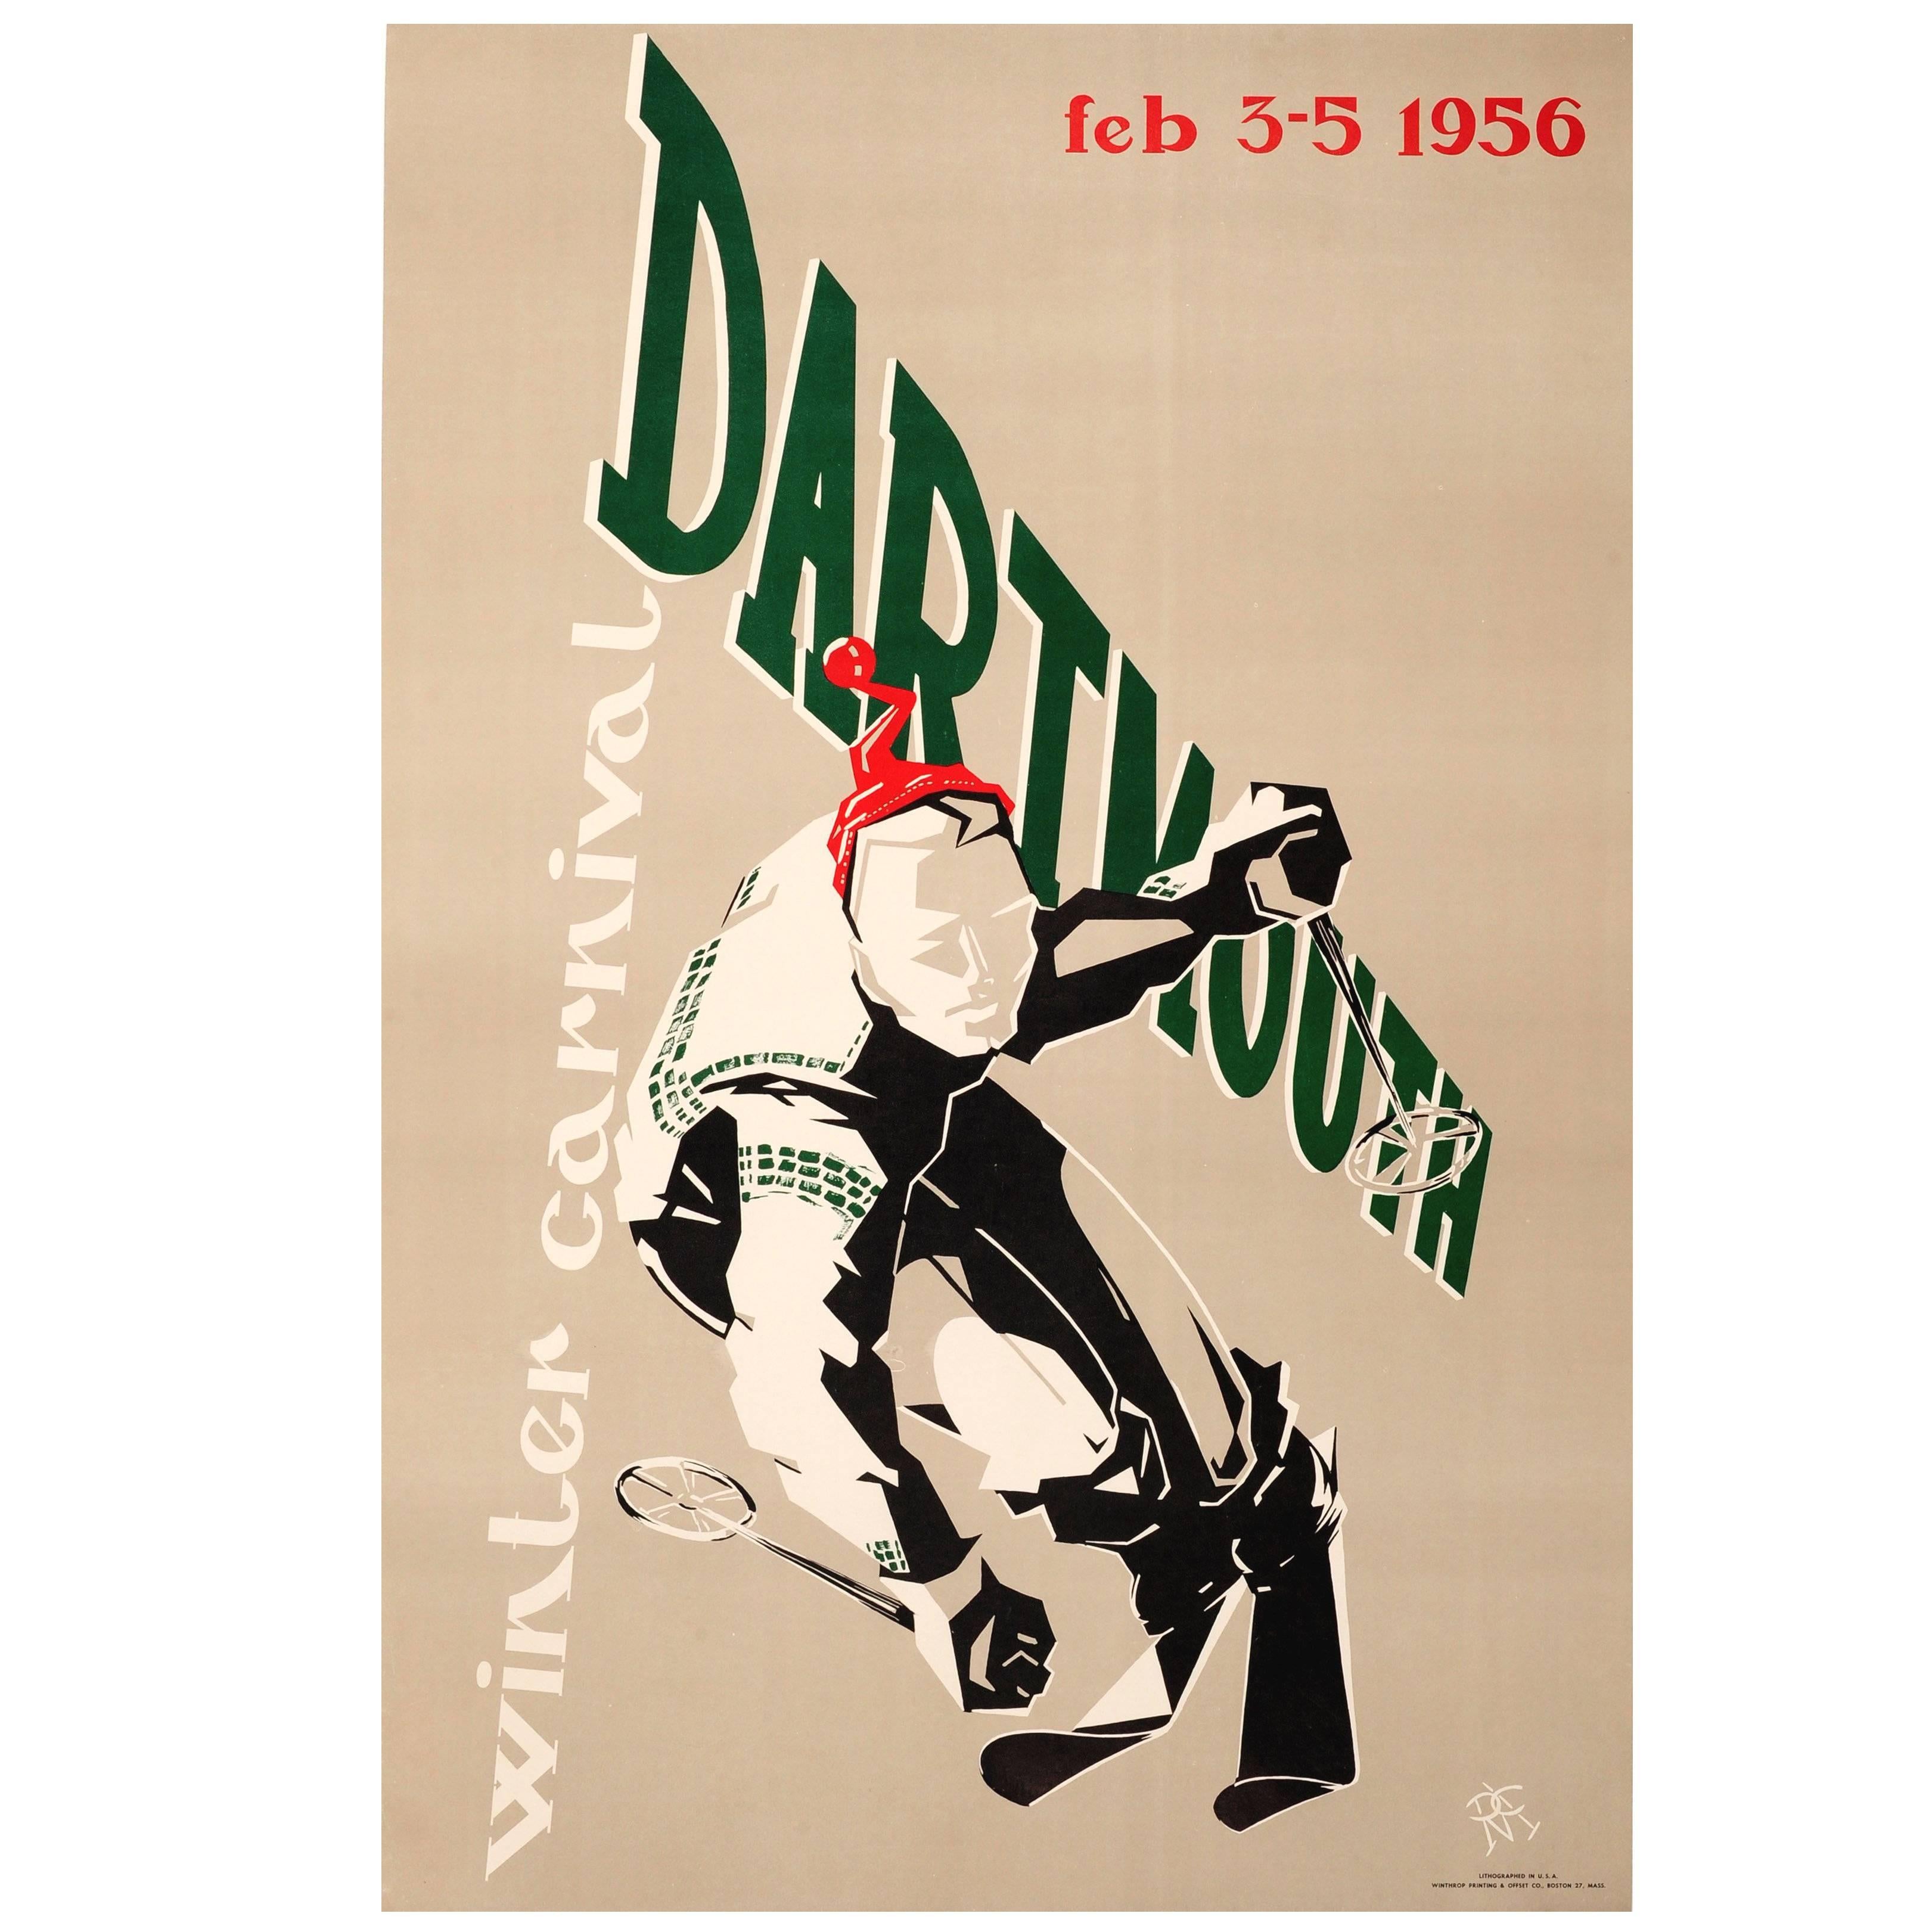 Original Vintage Skiing Event Poster for the 1956 Dartmouth Winter Carnival